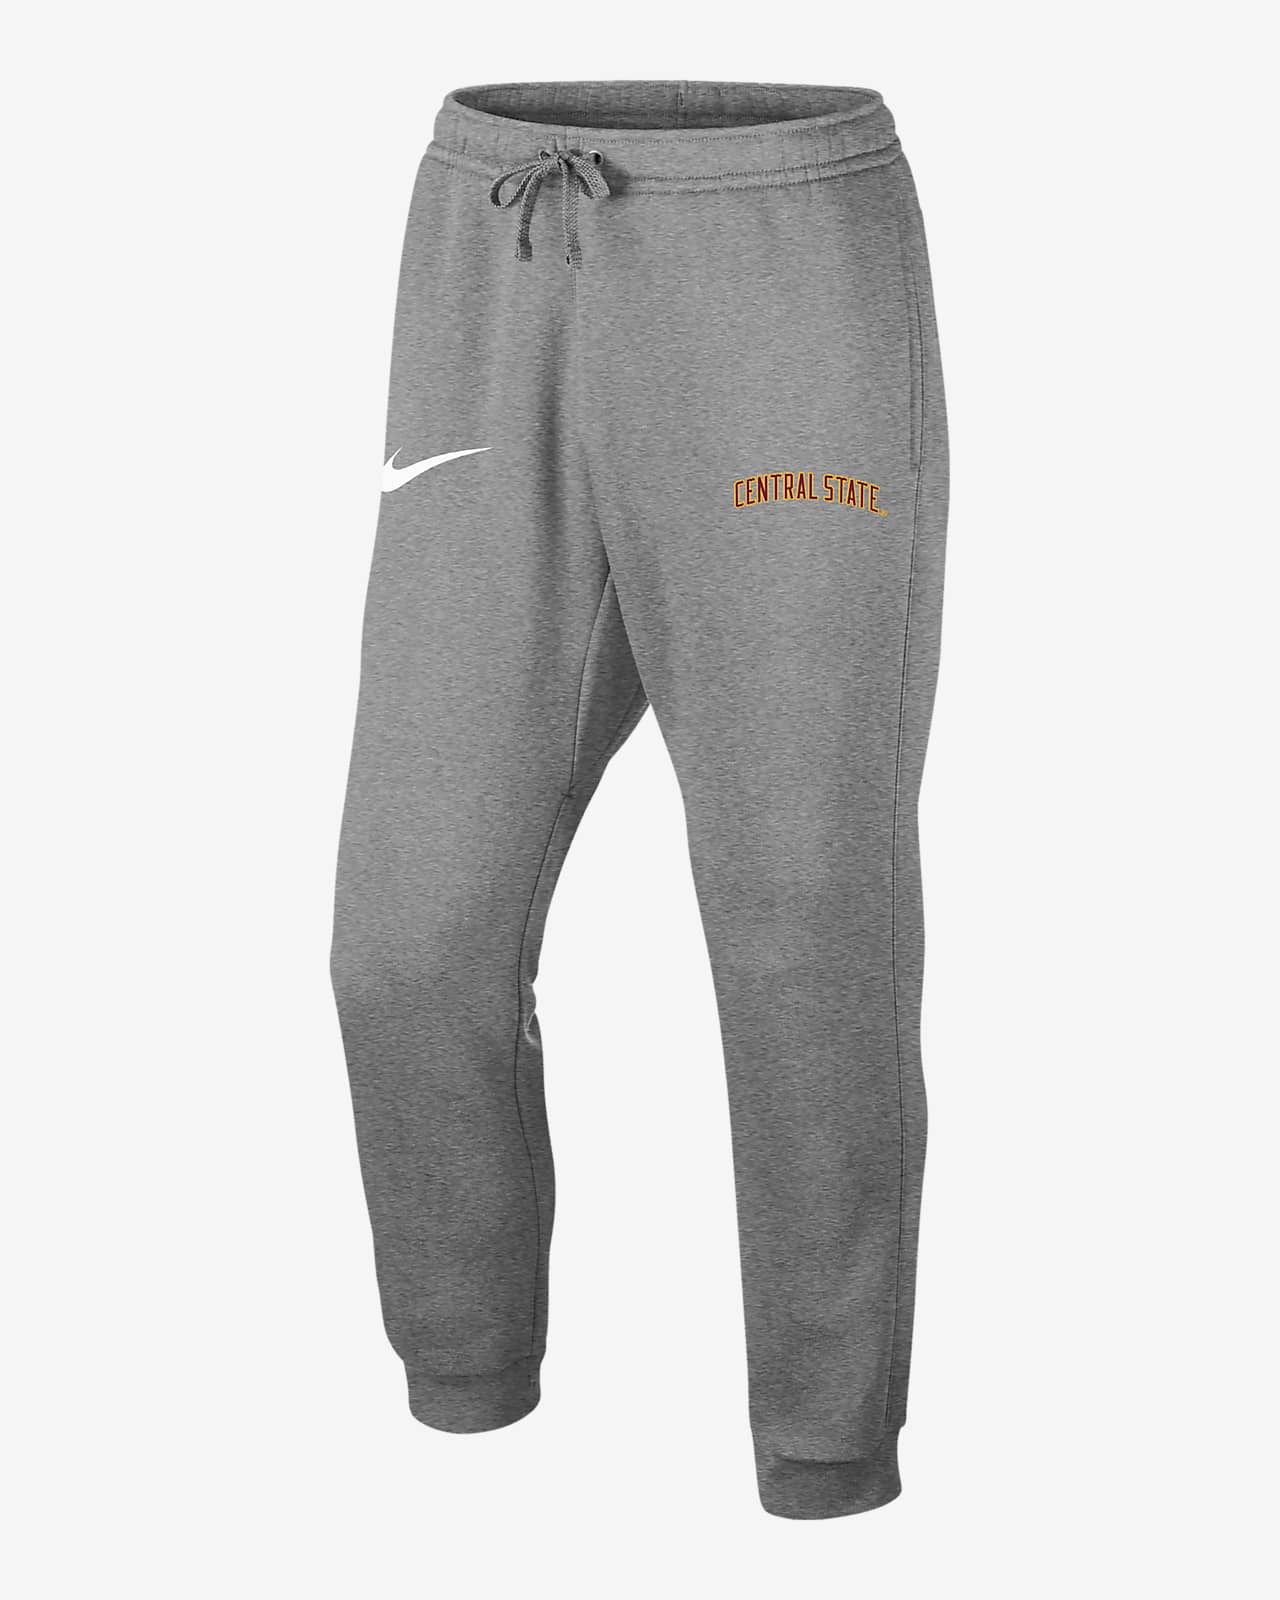 Nike College Club Fleece (Central State) Joggers